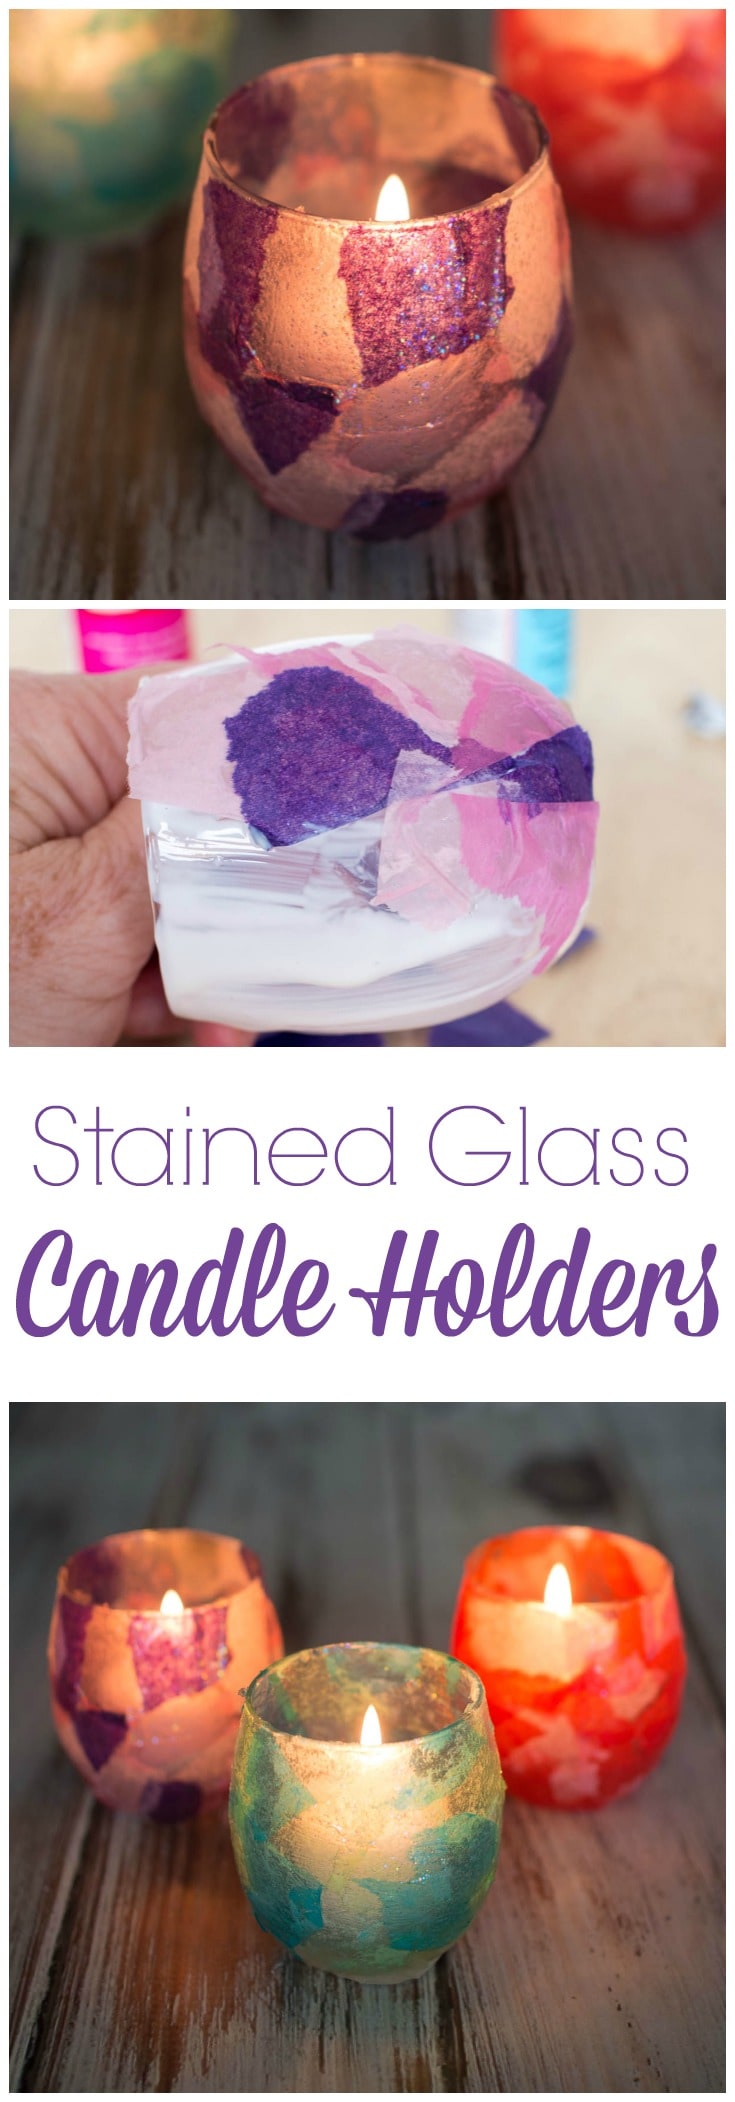 Stained Glass Votive Candle Holders.